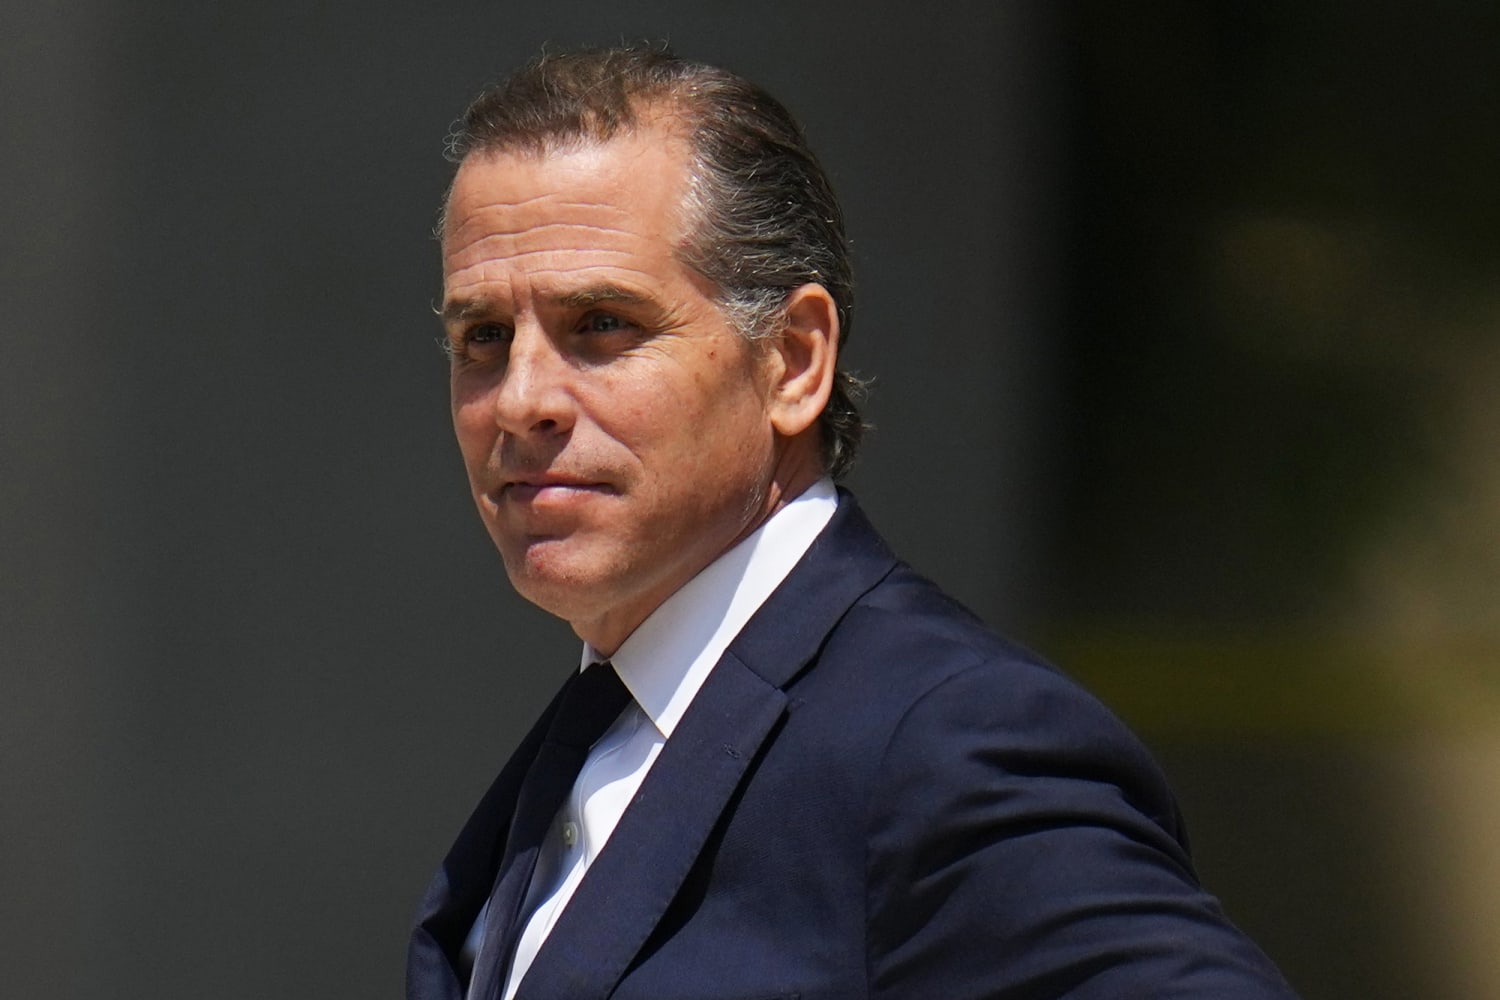 FBI agent disputed key parts of IRS whistleblower claims about Hunter Biden investigation